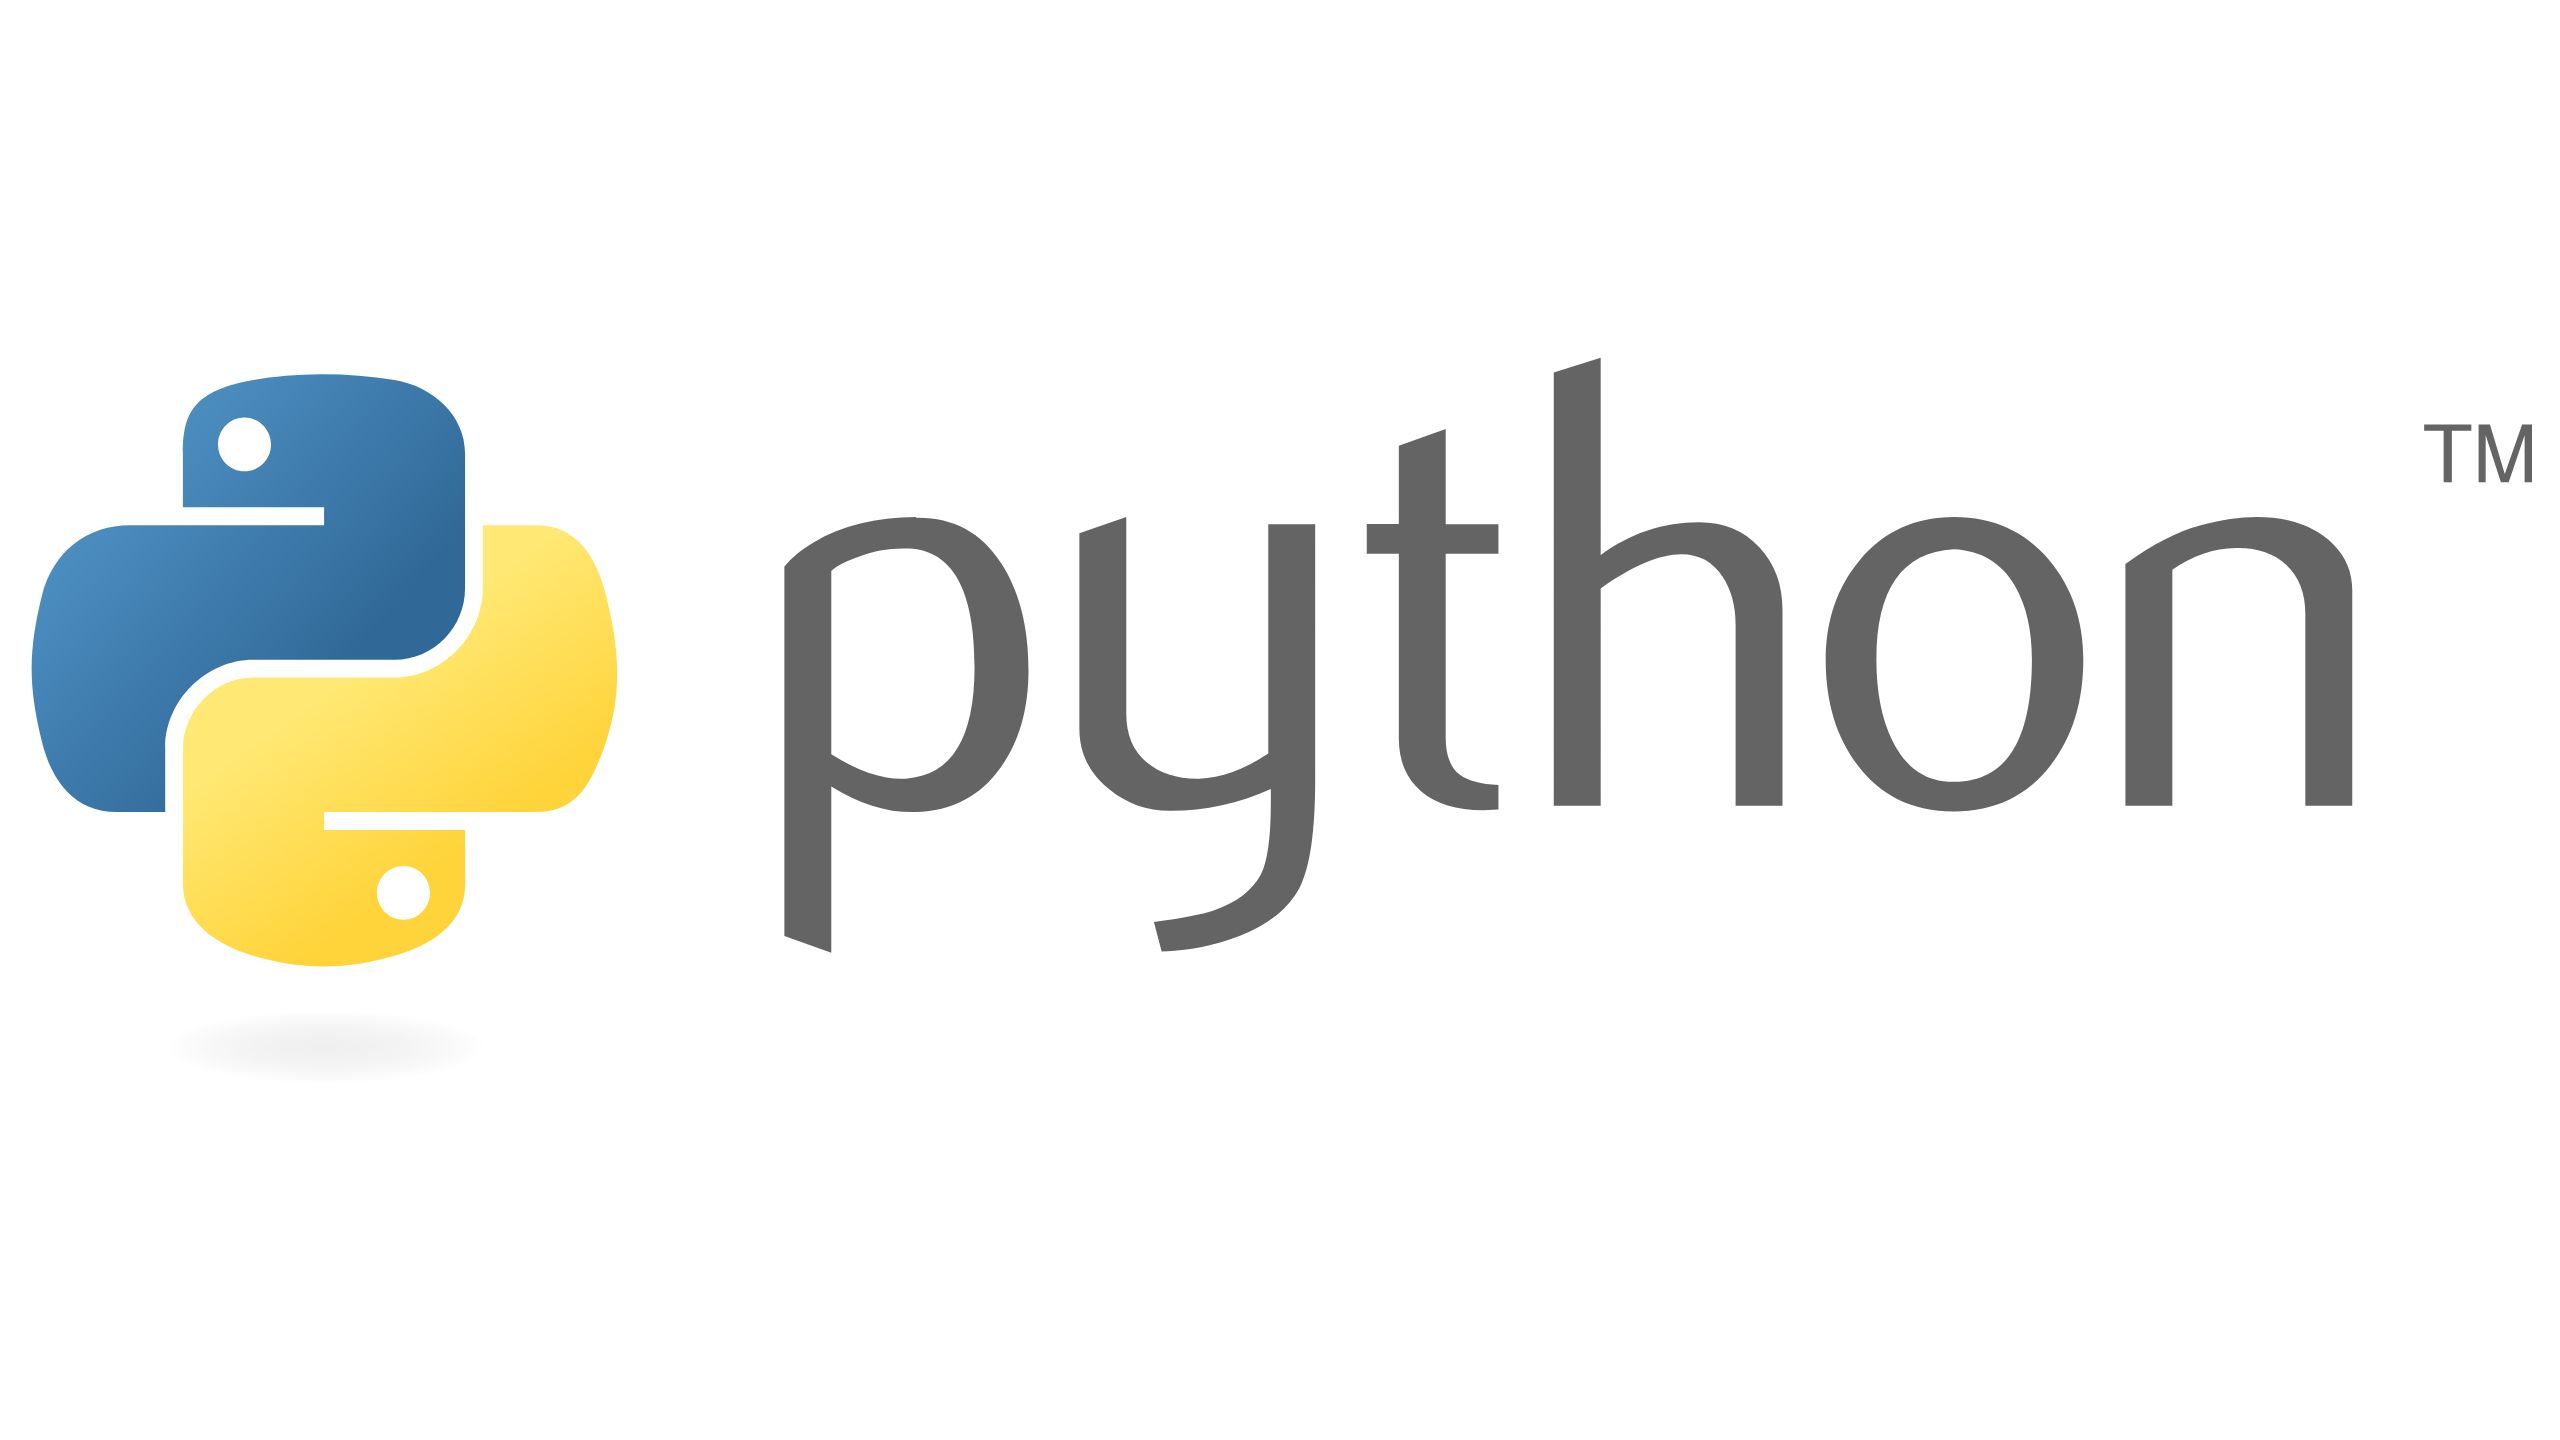 Elevate Your Programming Skills: Python Certification Online for Beginners